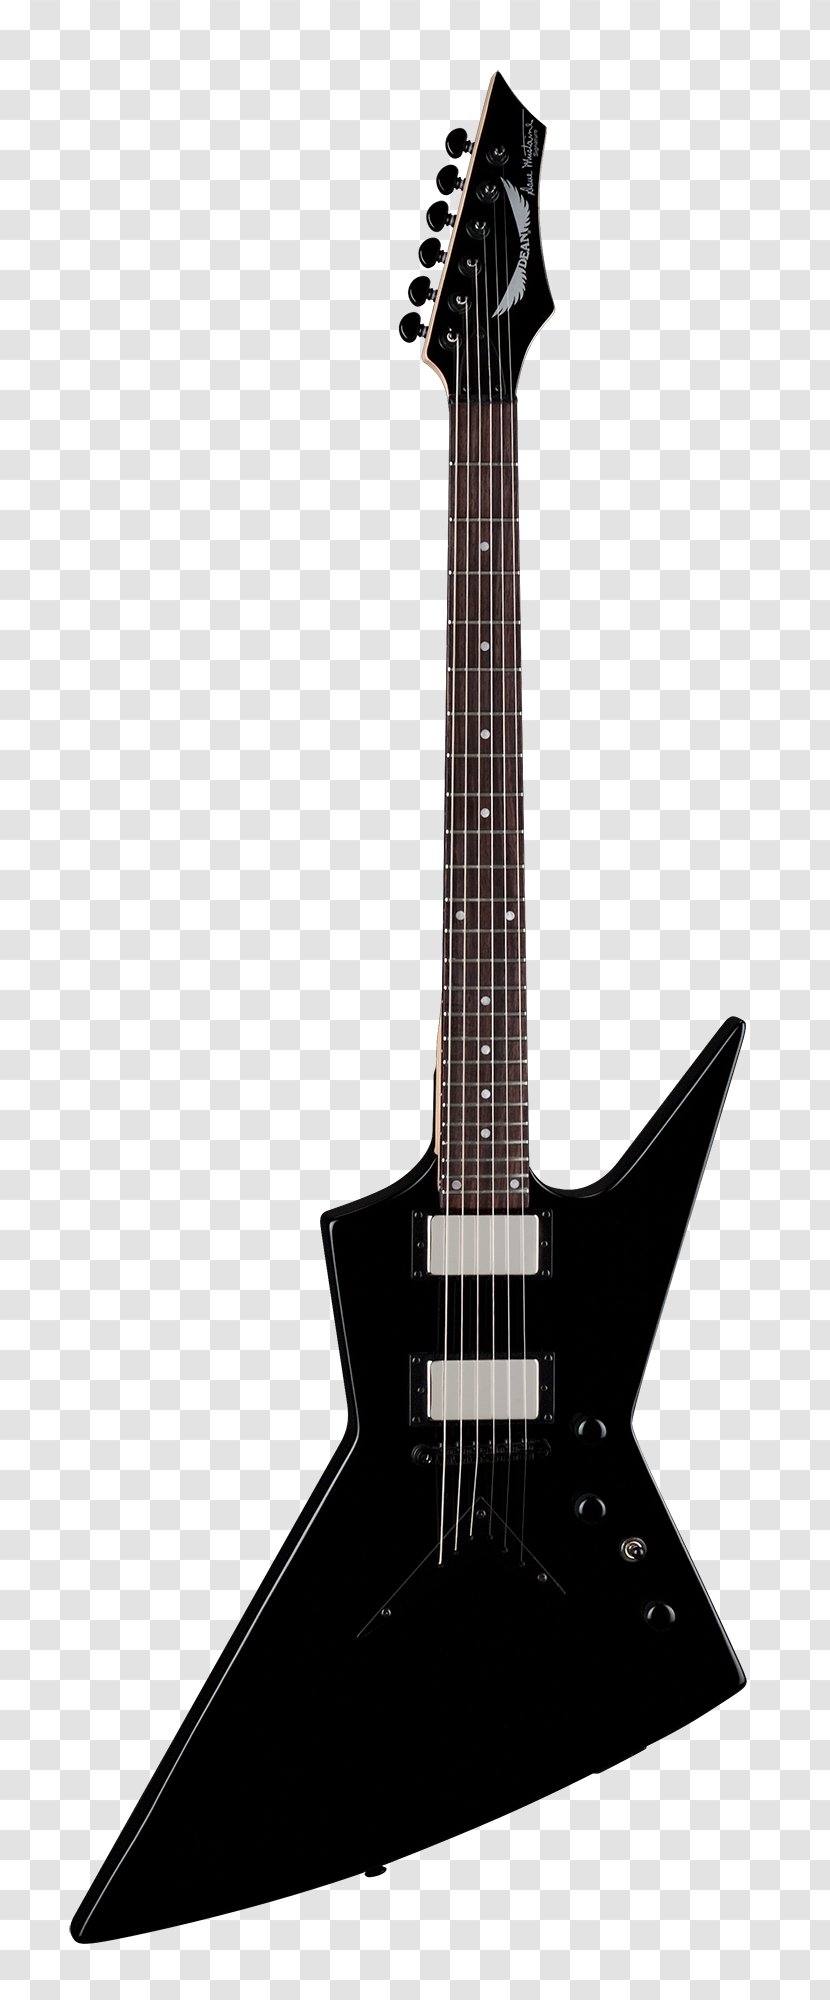 Dean Guitars Dave Mustaine Zero VMNT Electric Guitar - Black And White Transparent PNG